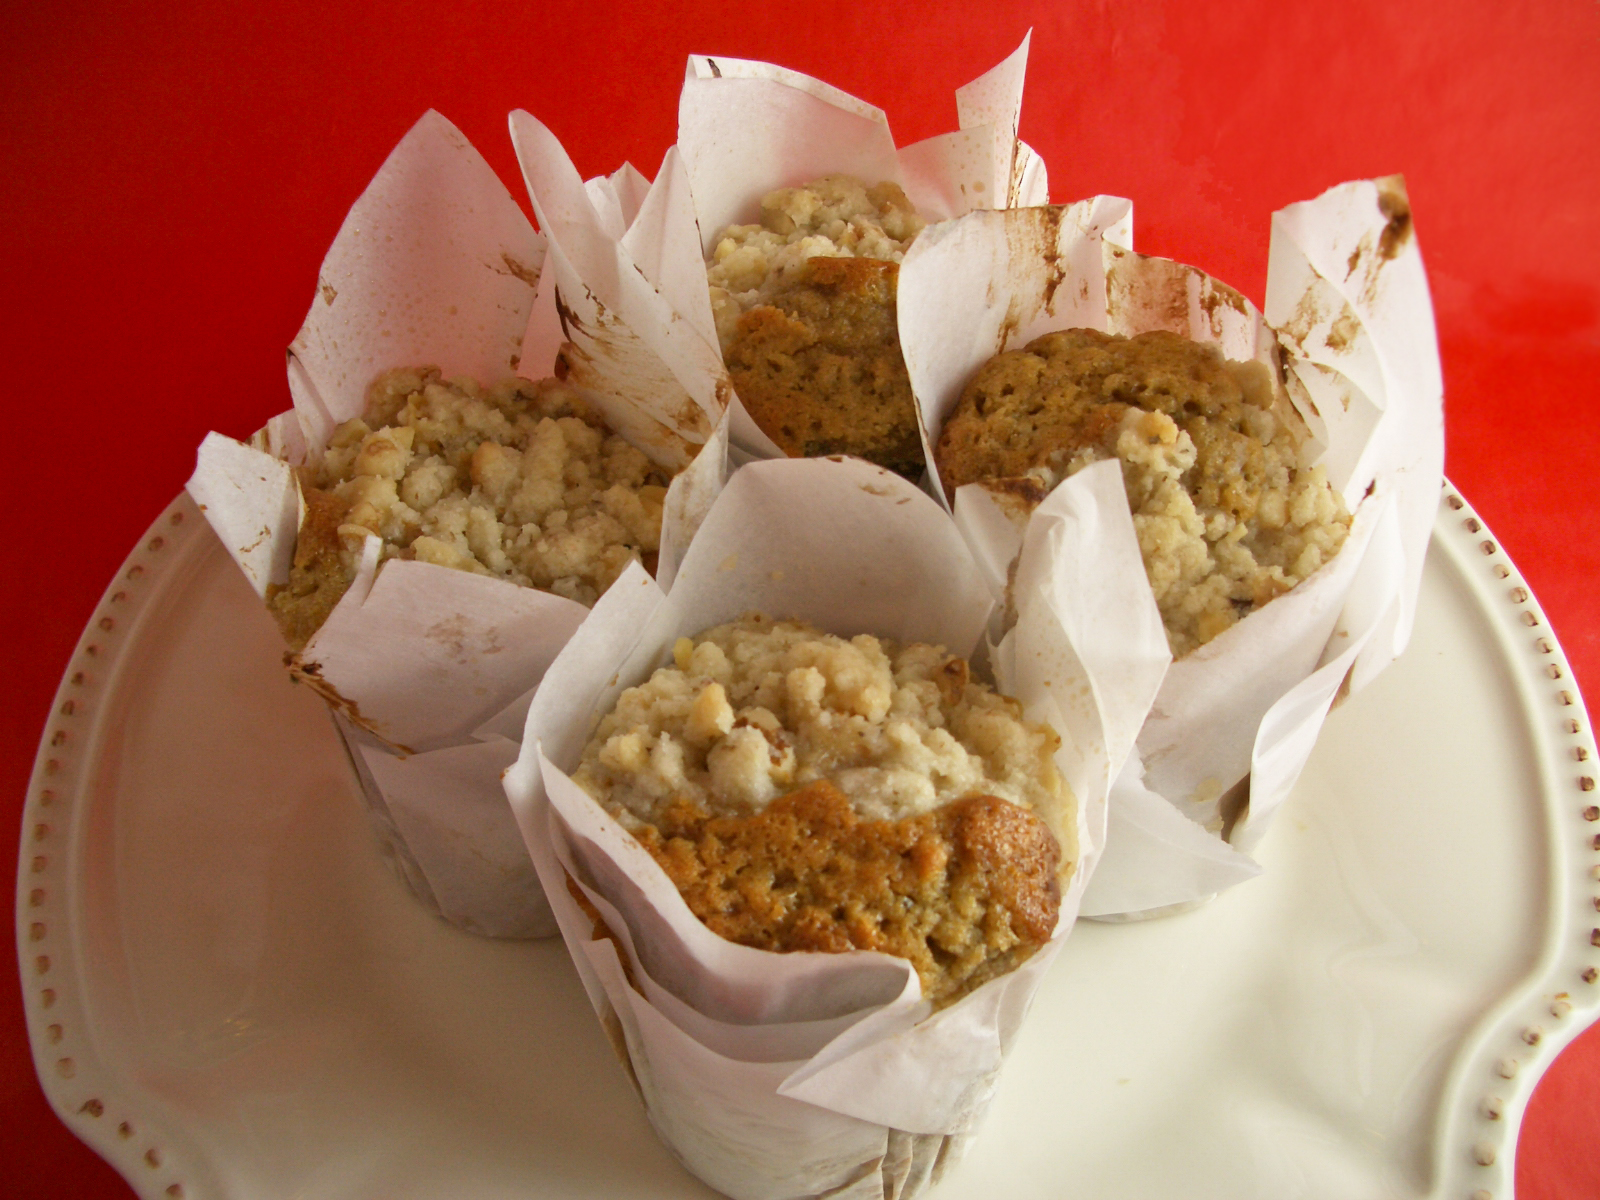 Goodies by Anna: Banana Muffins with Walnut Streusel Topping